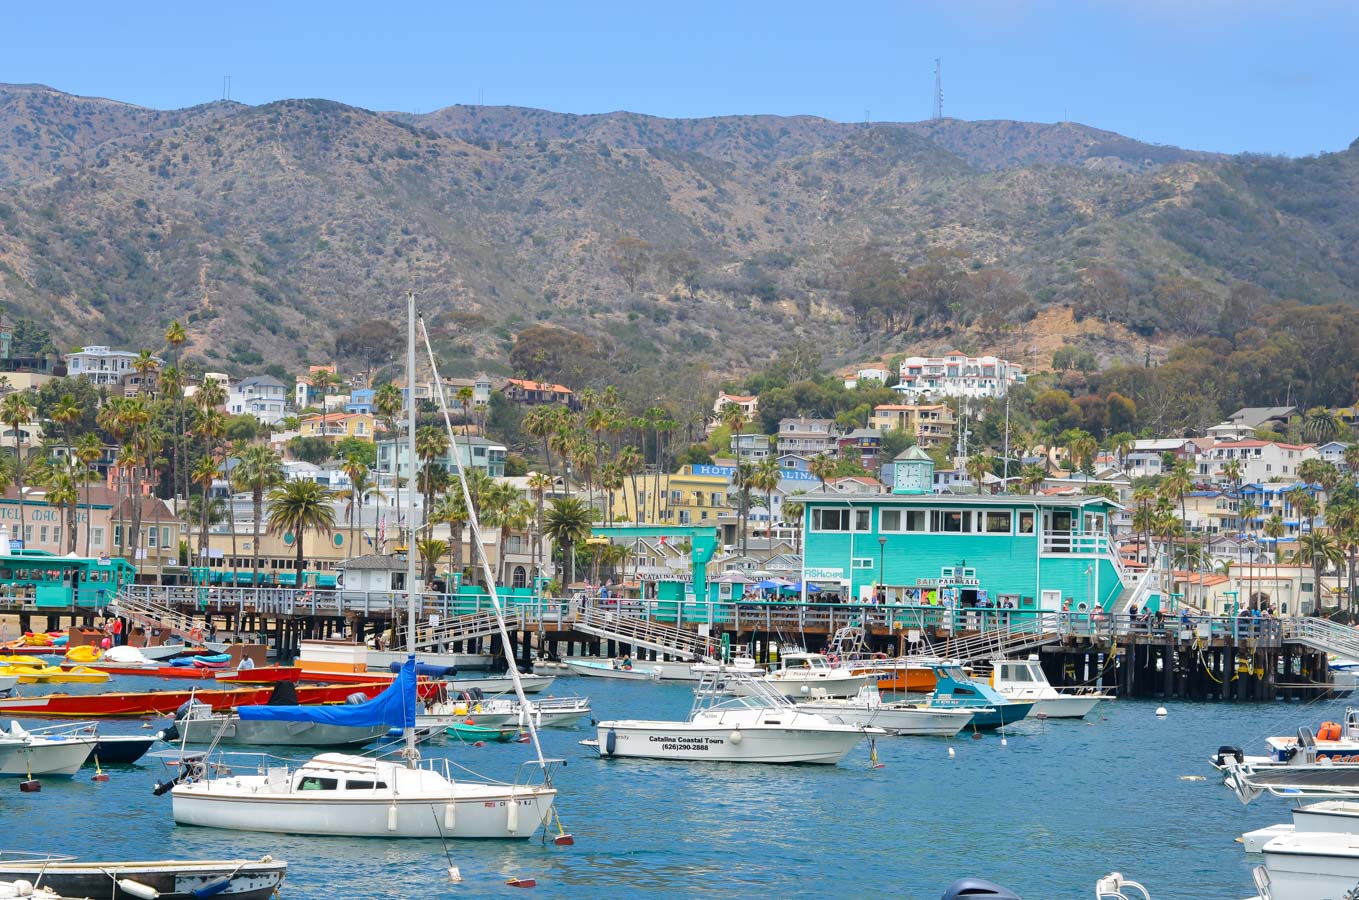 What to Do One Day Trip to Avalon Catalina Island